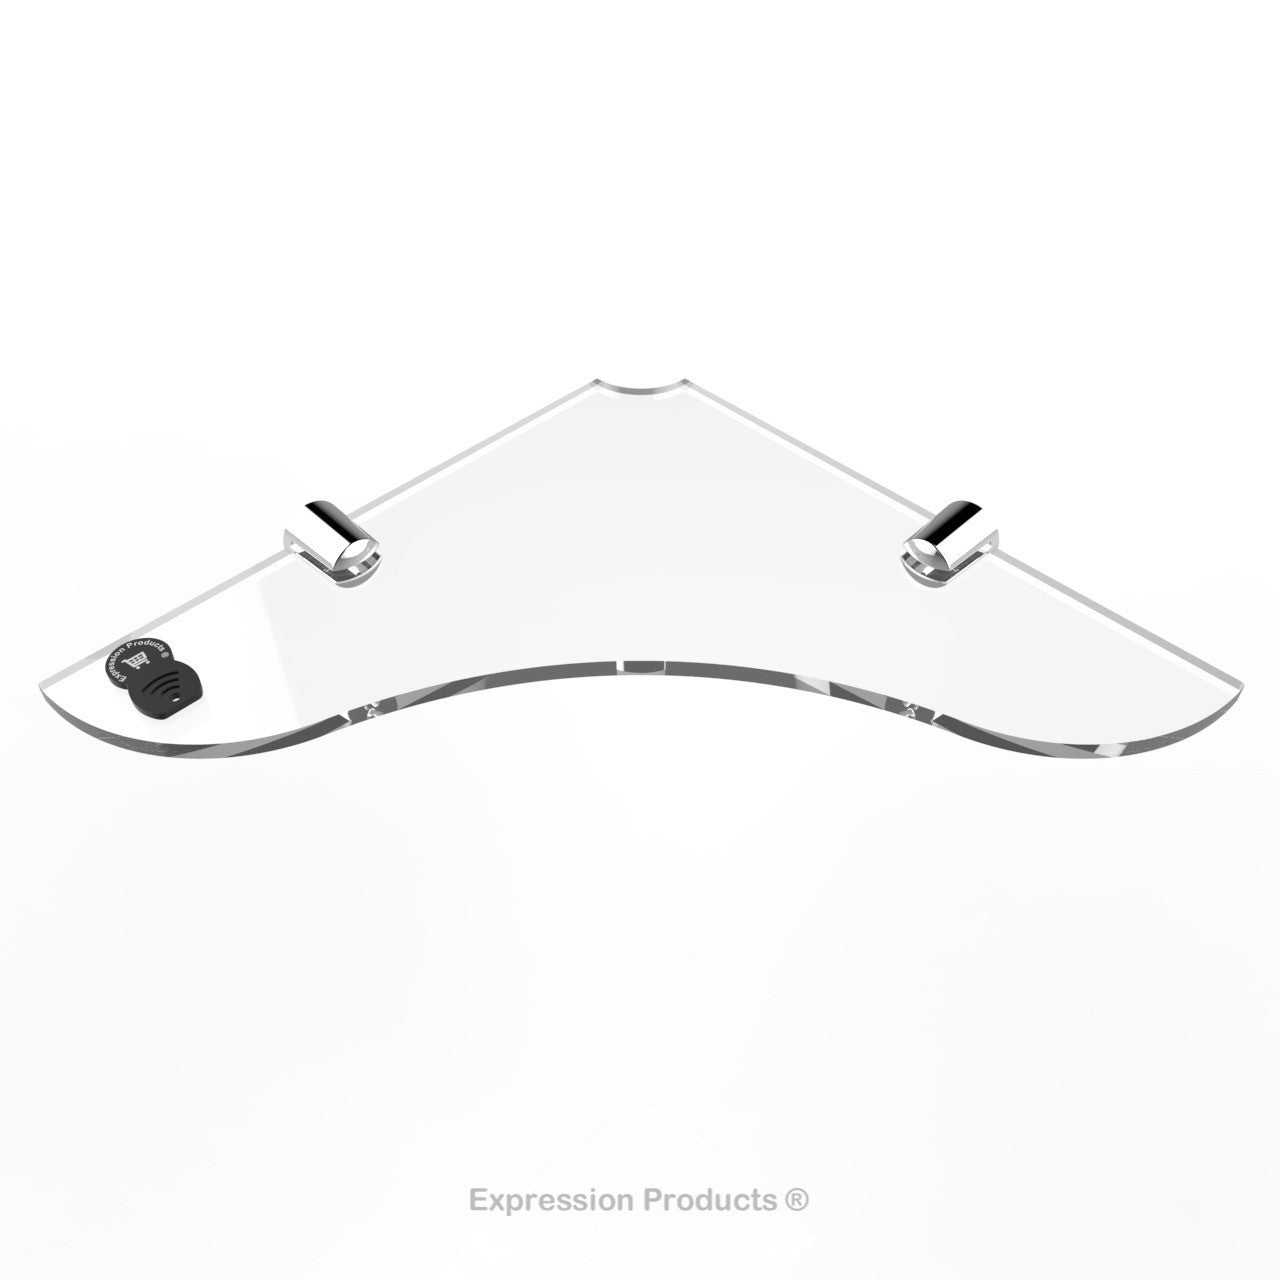 Corner Acrylic Shelf With Cable Feed Through - Style 005 - Expression Products Ltd